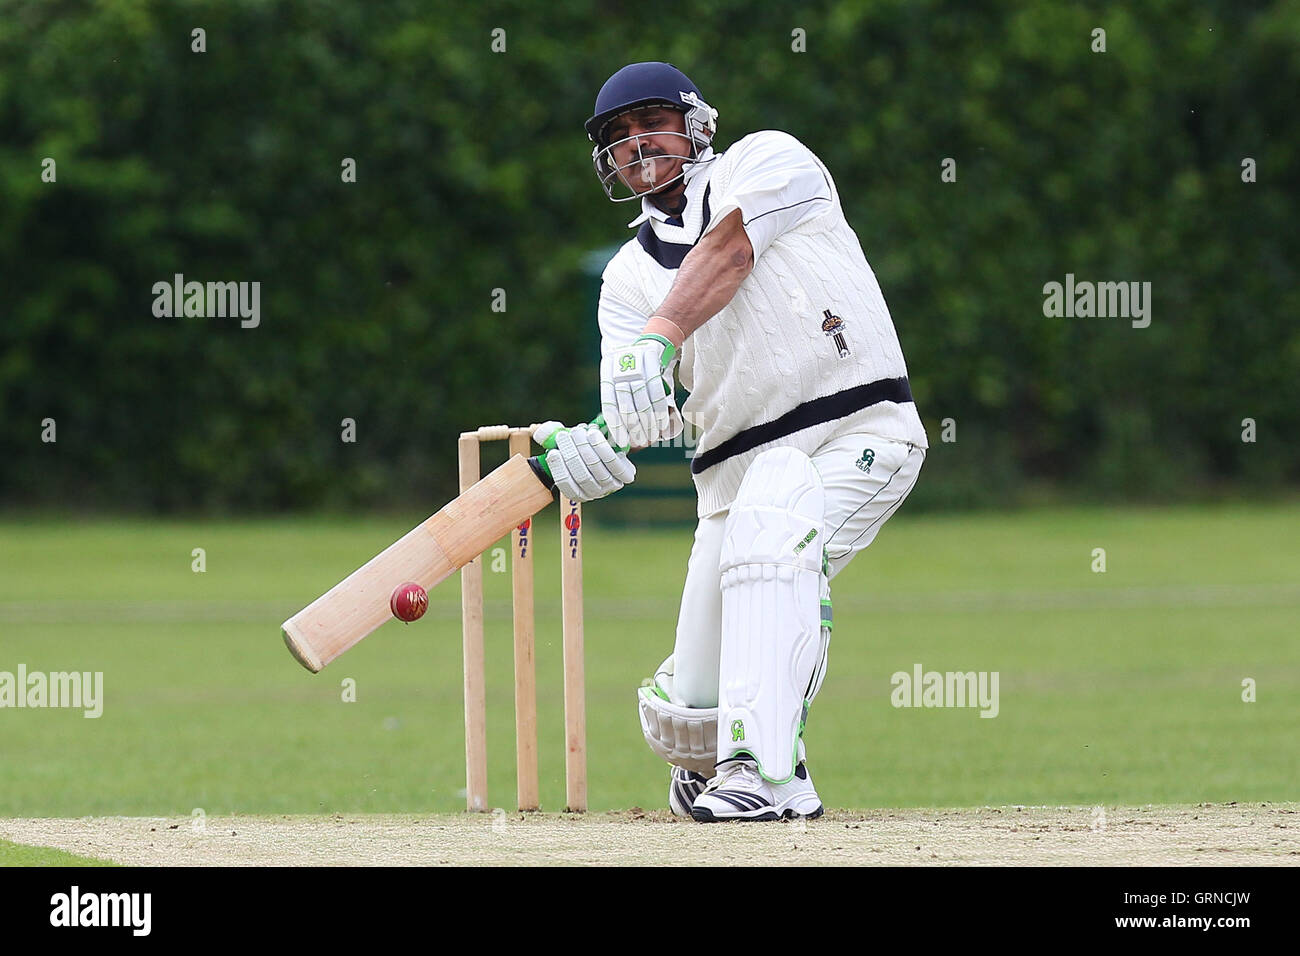 Arshad Ali in batting action for Upminster - Upminster CC vs Brentwood CC - Essex Cricket League - 07/06/14 Stock Photo